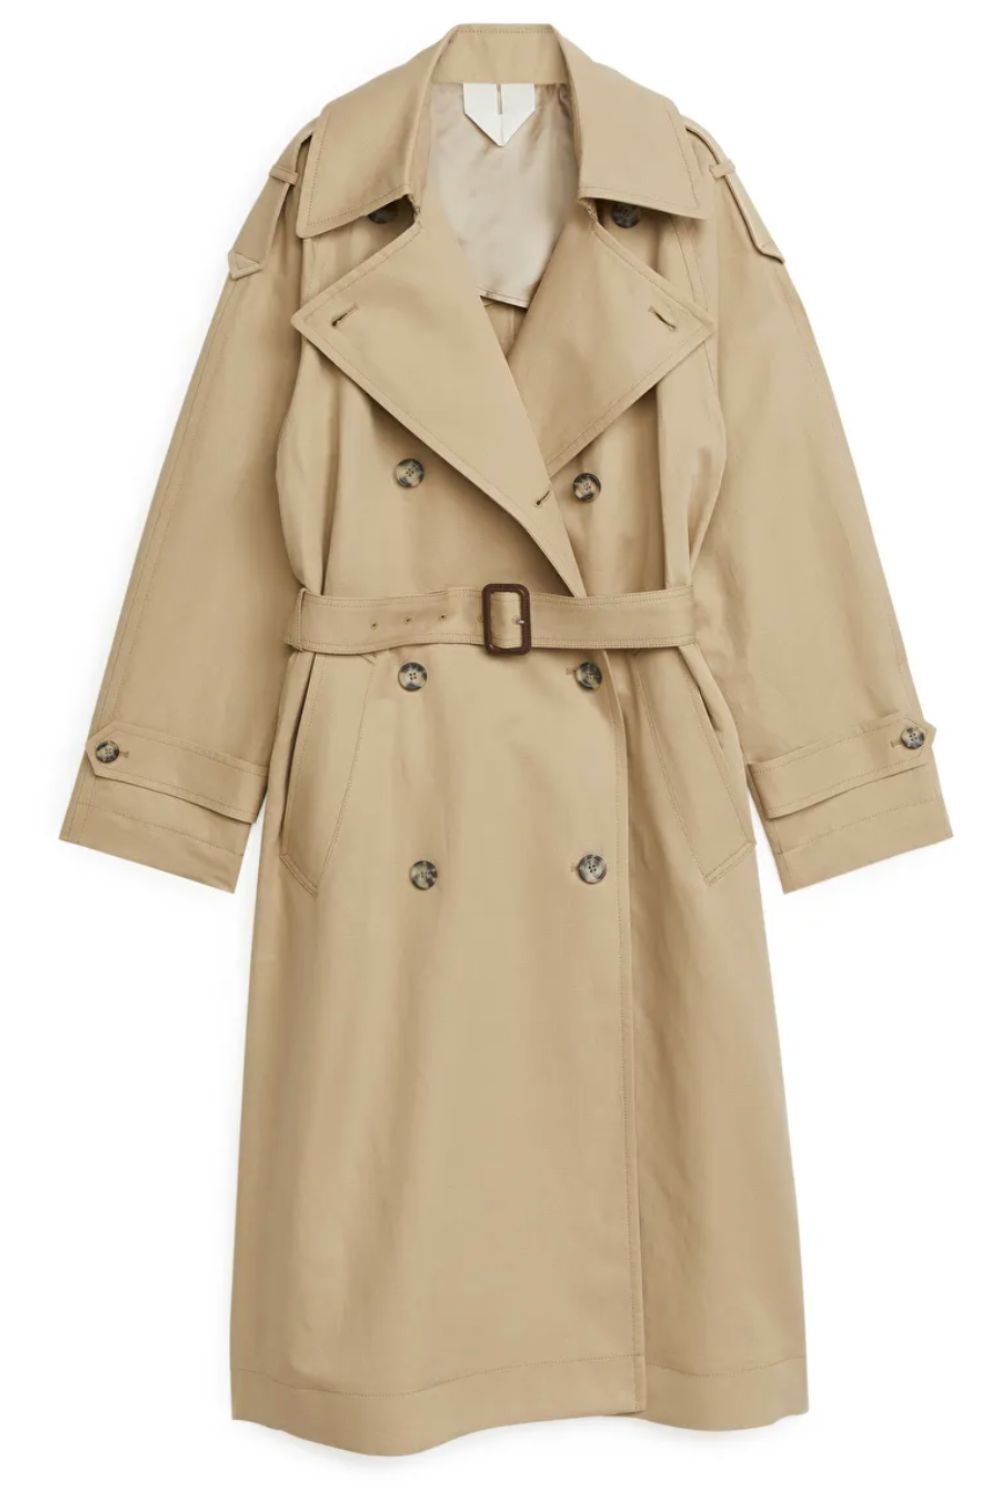 The best Arket trench coats to shop for spring | Marie Claire UK